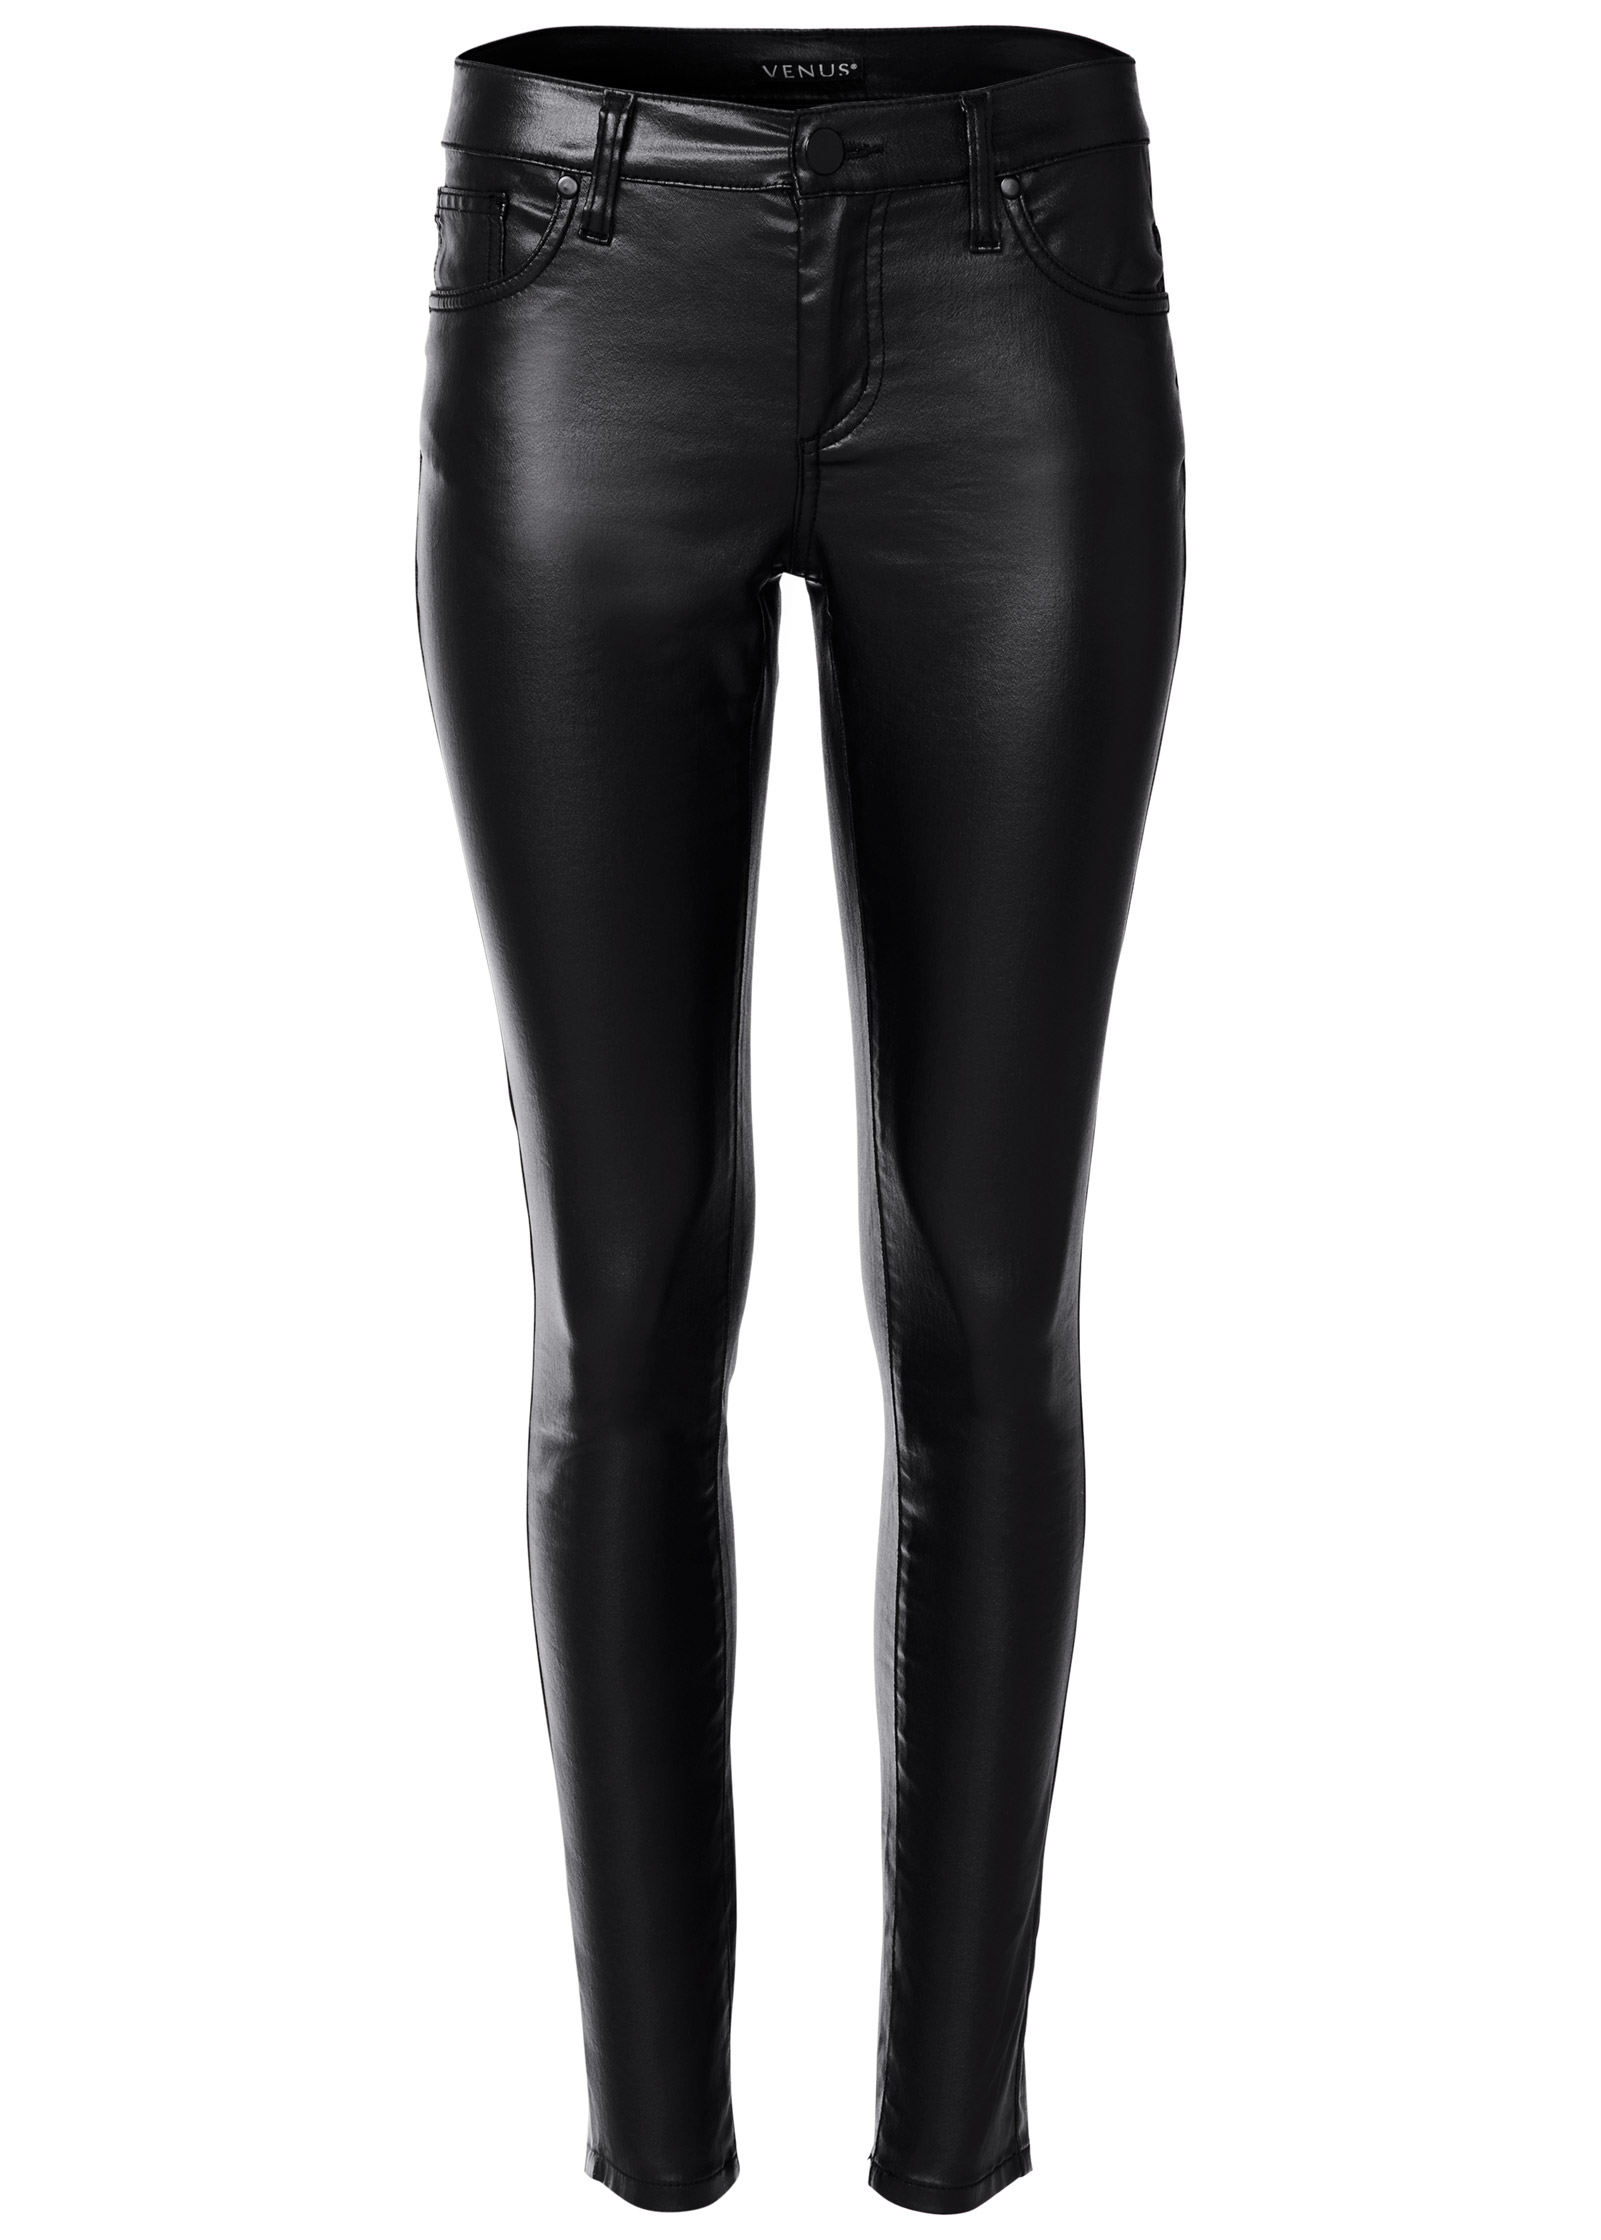 Buy > myer leather pants > in stock